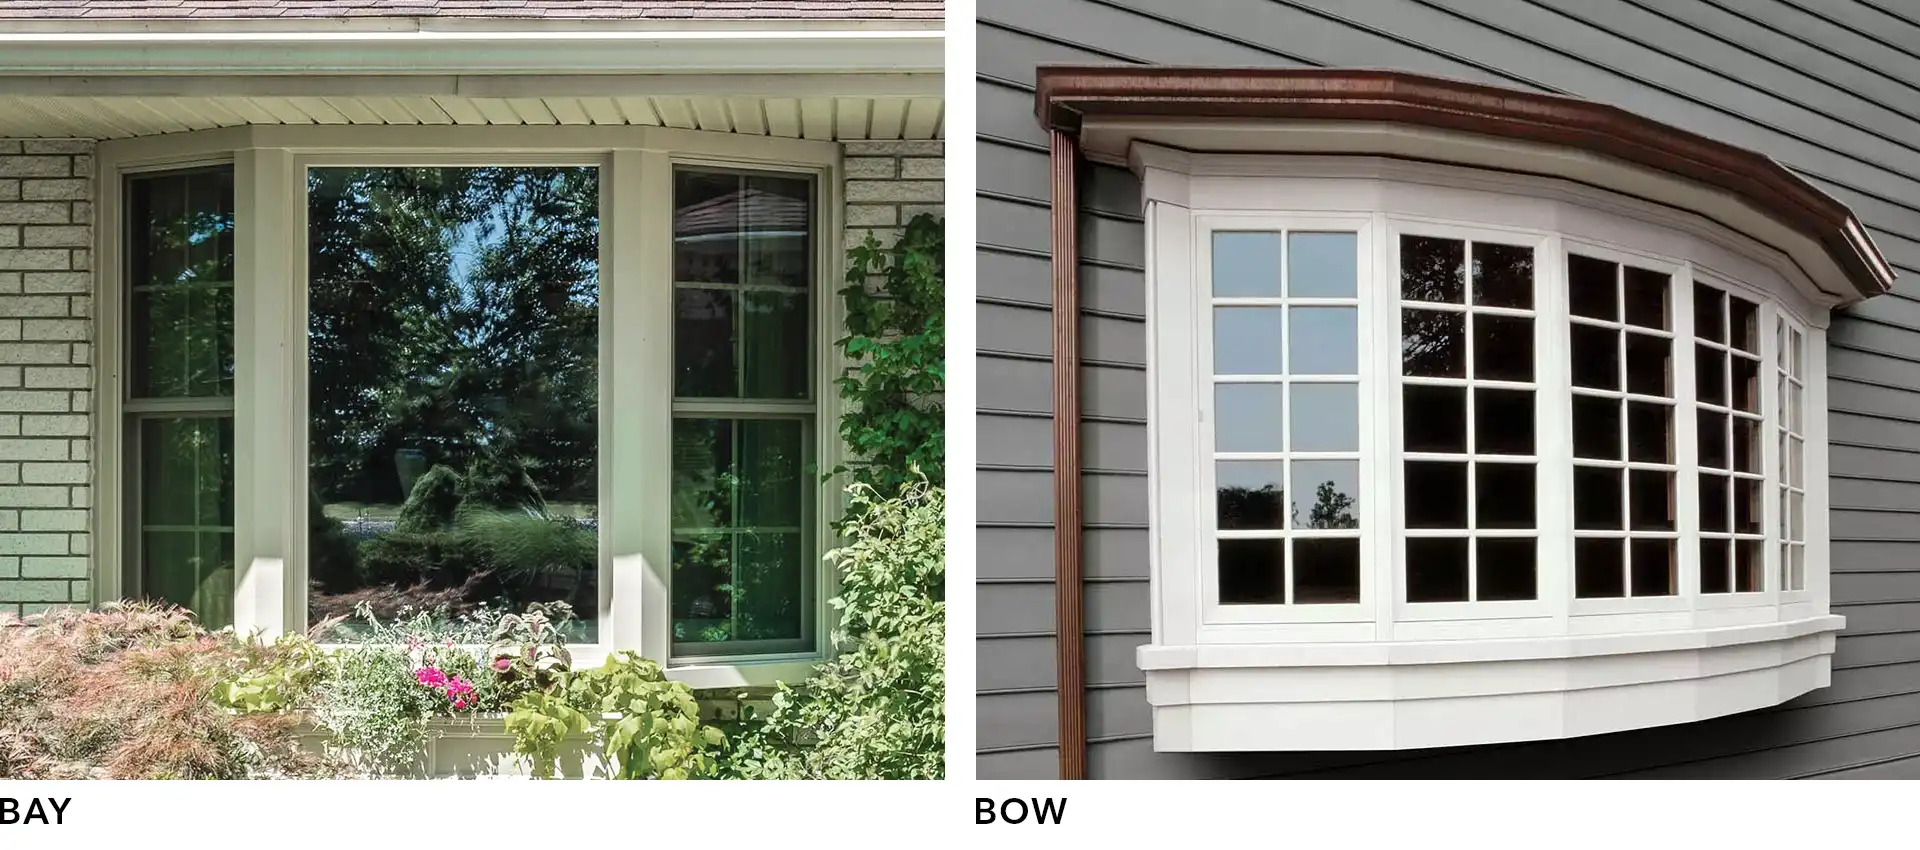 Exterior view of a Marvin Replacement Bay Window next to an exterior image of a Marvin Replacement Bow Window.